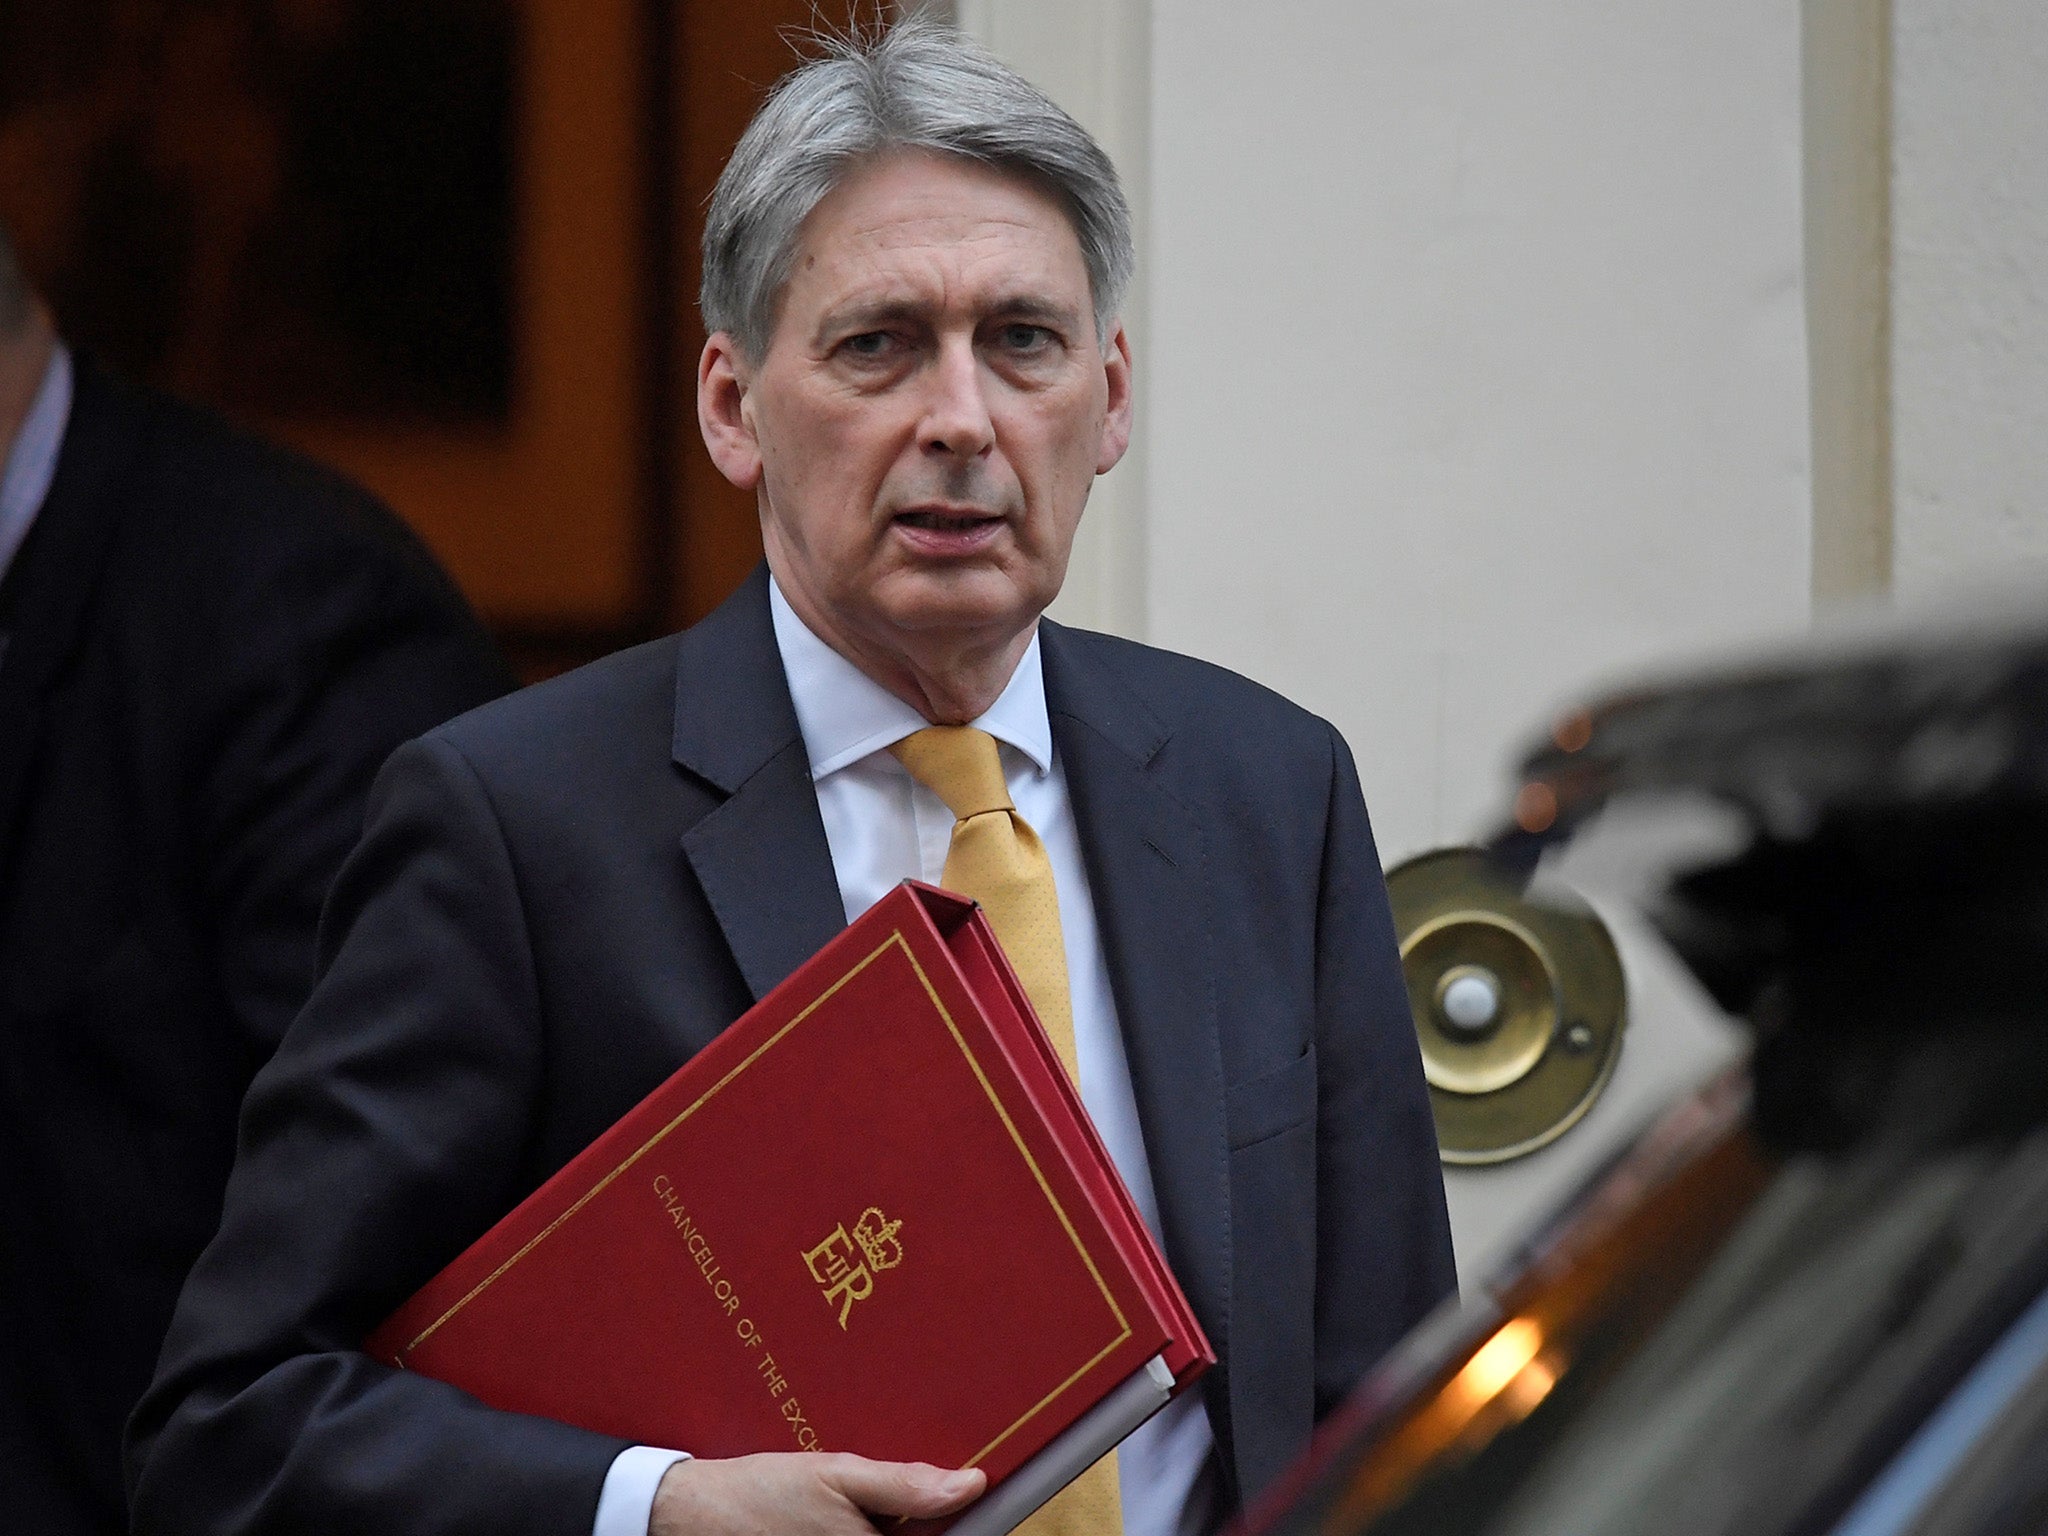 Brexit: Philip Hammond accuses &apos;backwards-looking&apos; EU of &apos;paranoia&apos; that other countries will leave